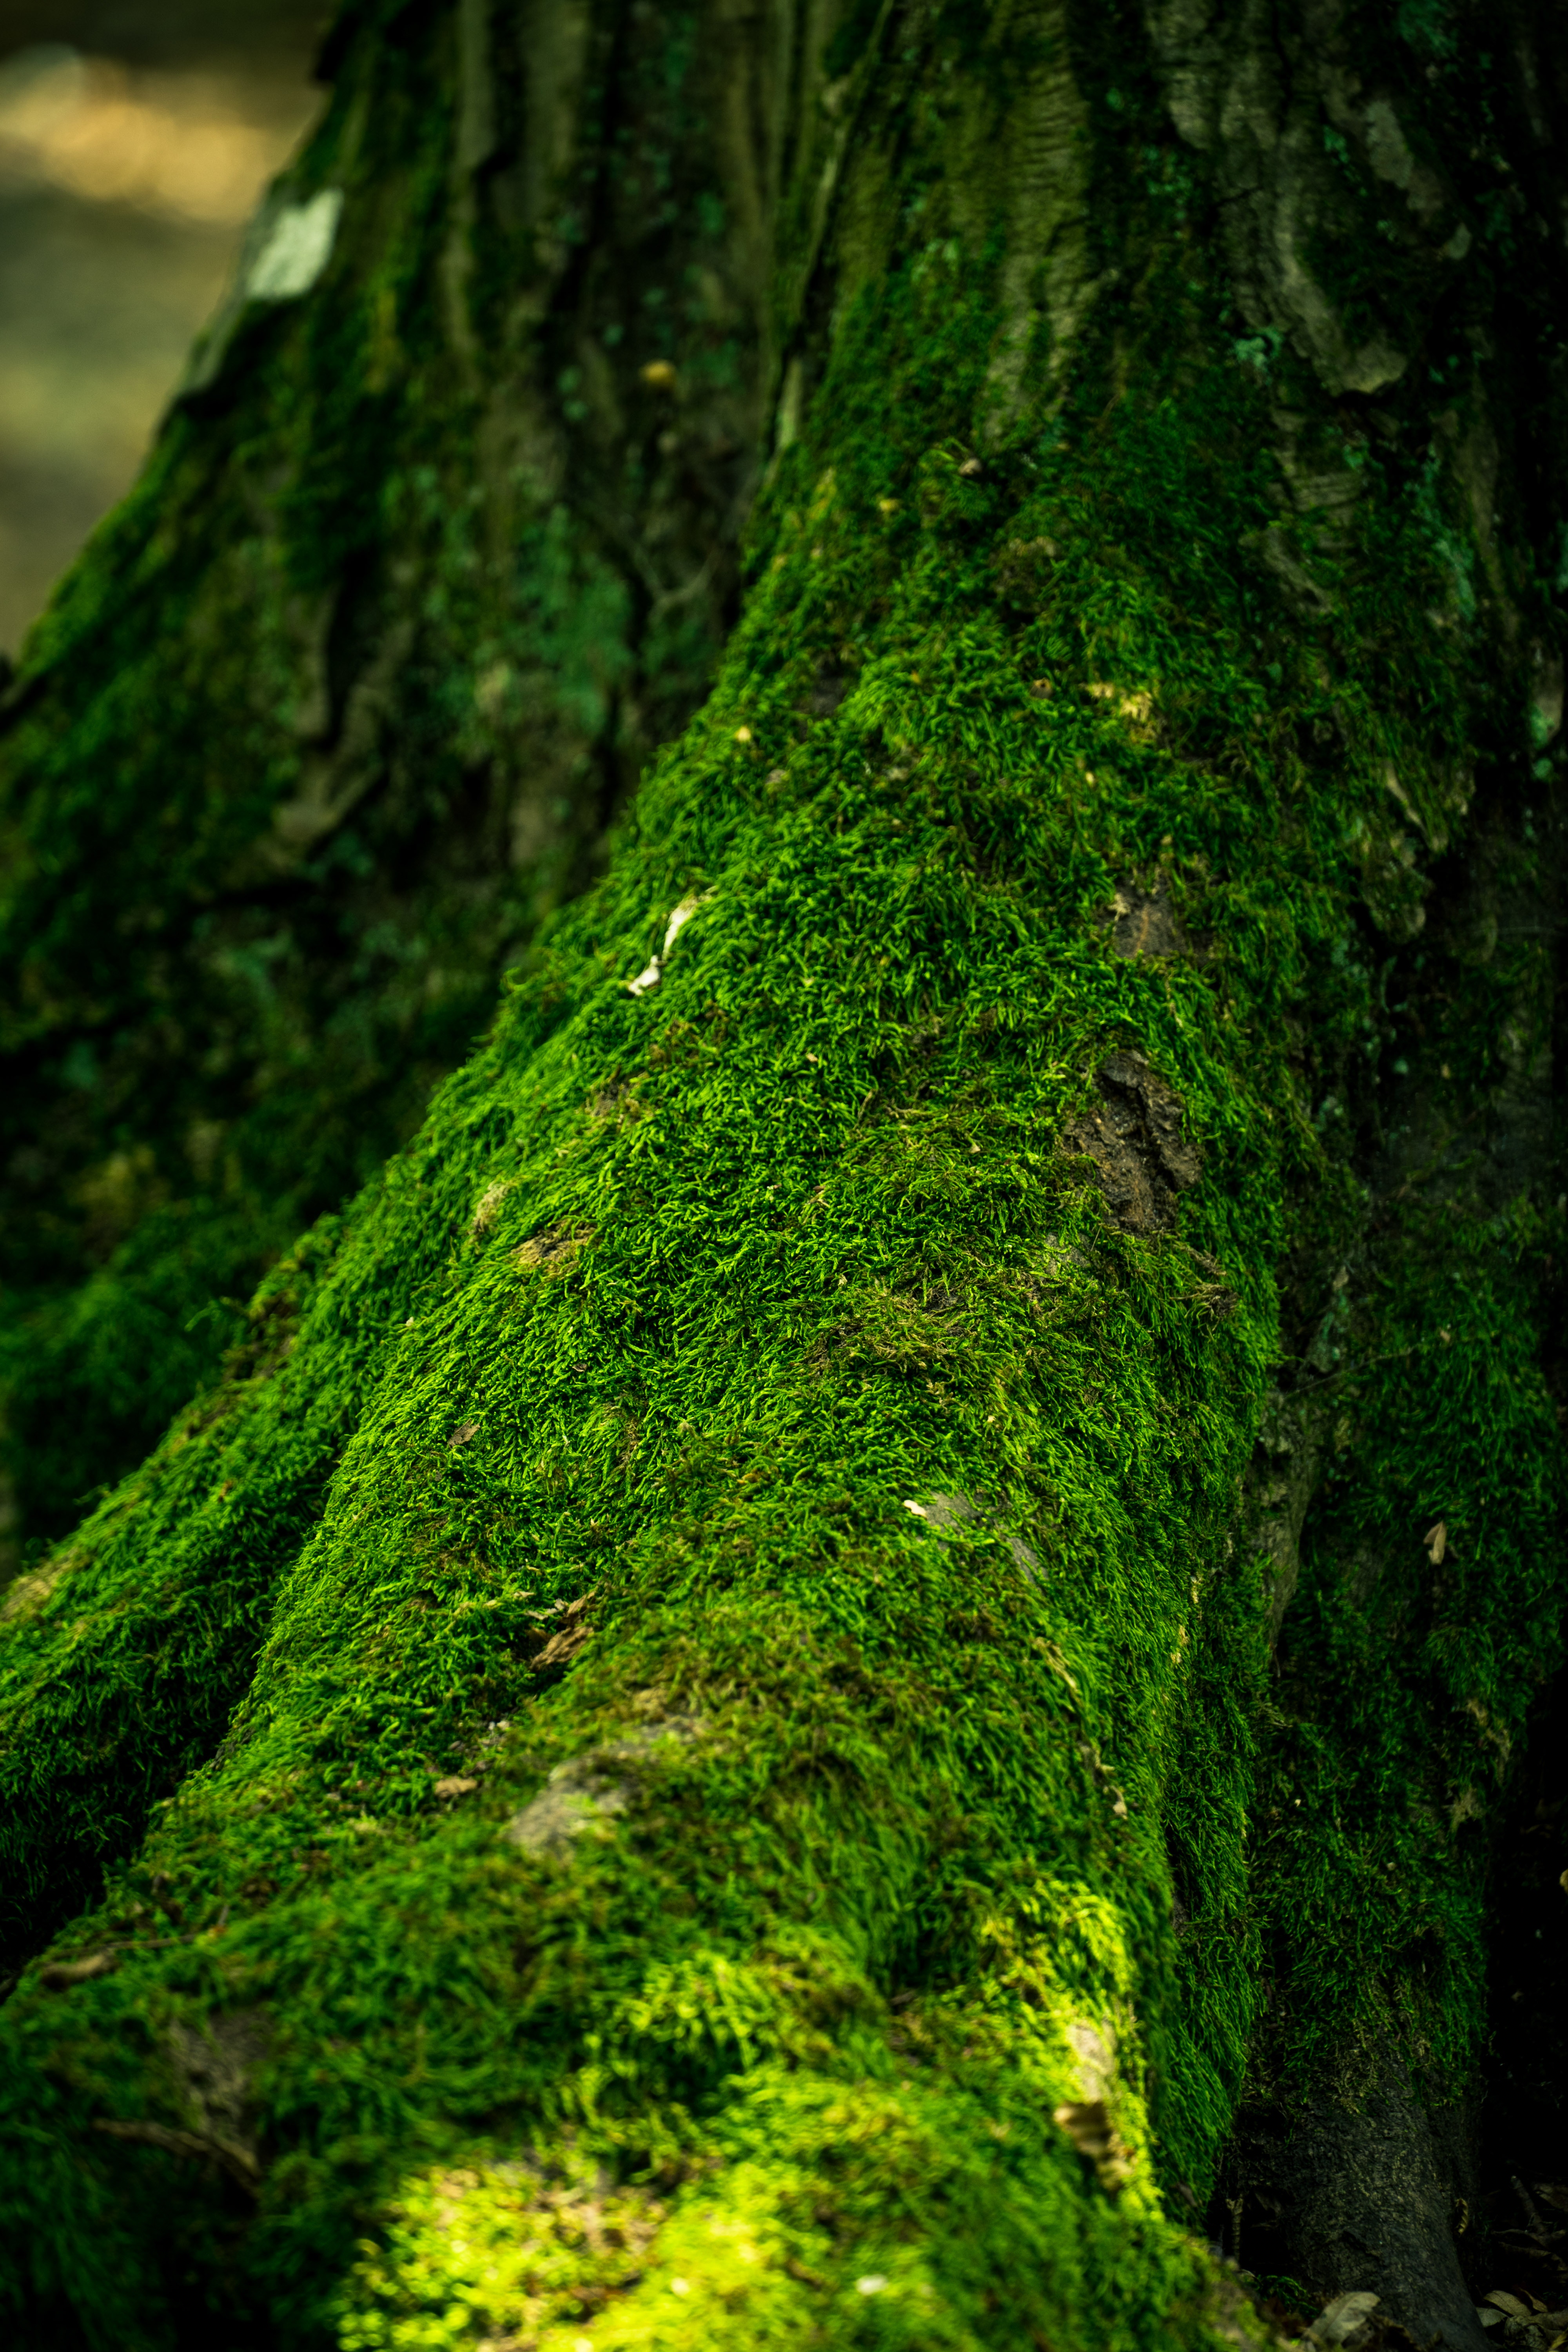 A tree trunk covered in green moss.